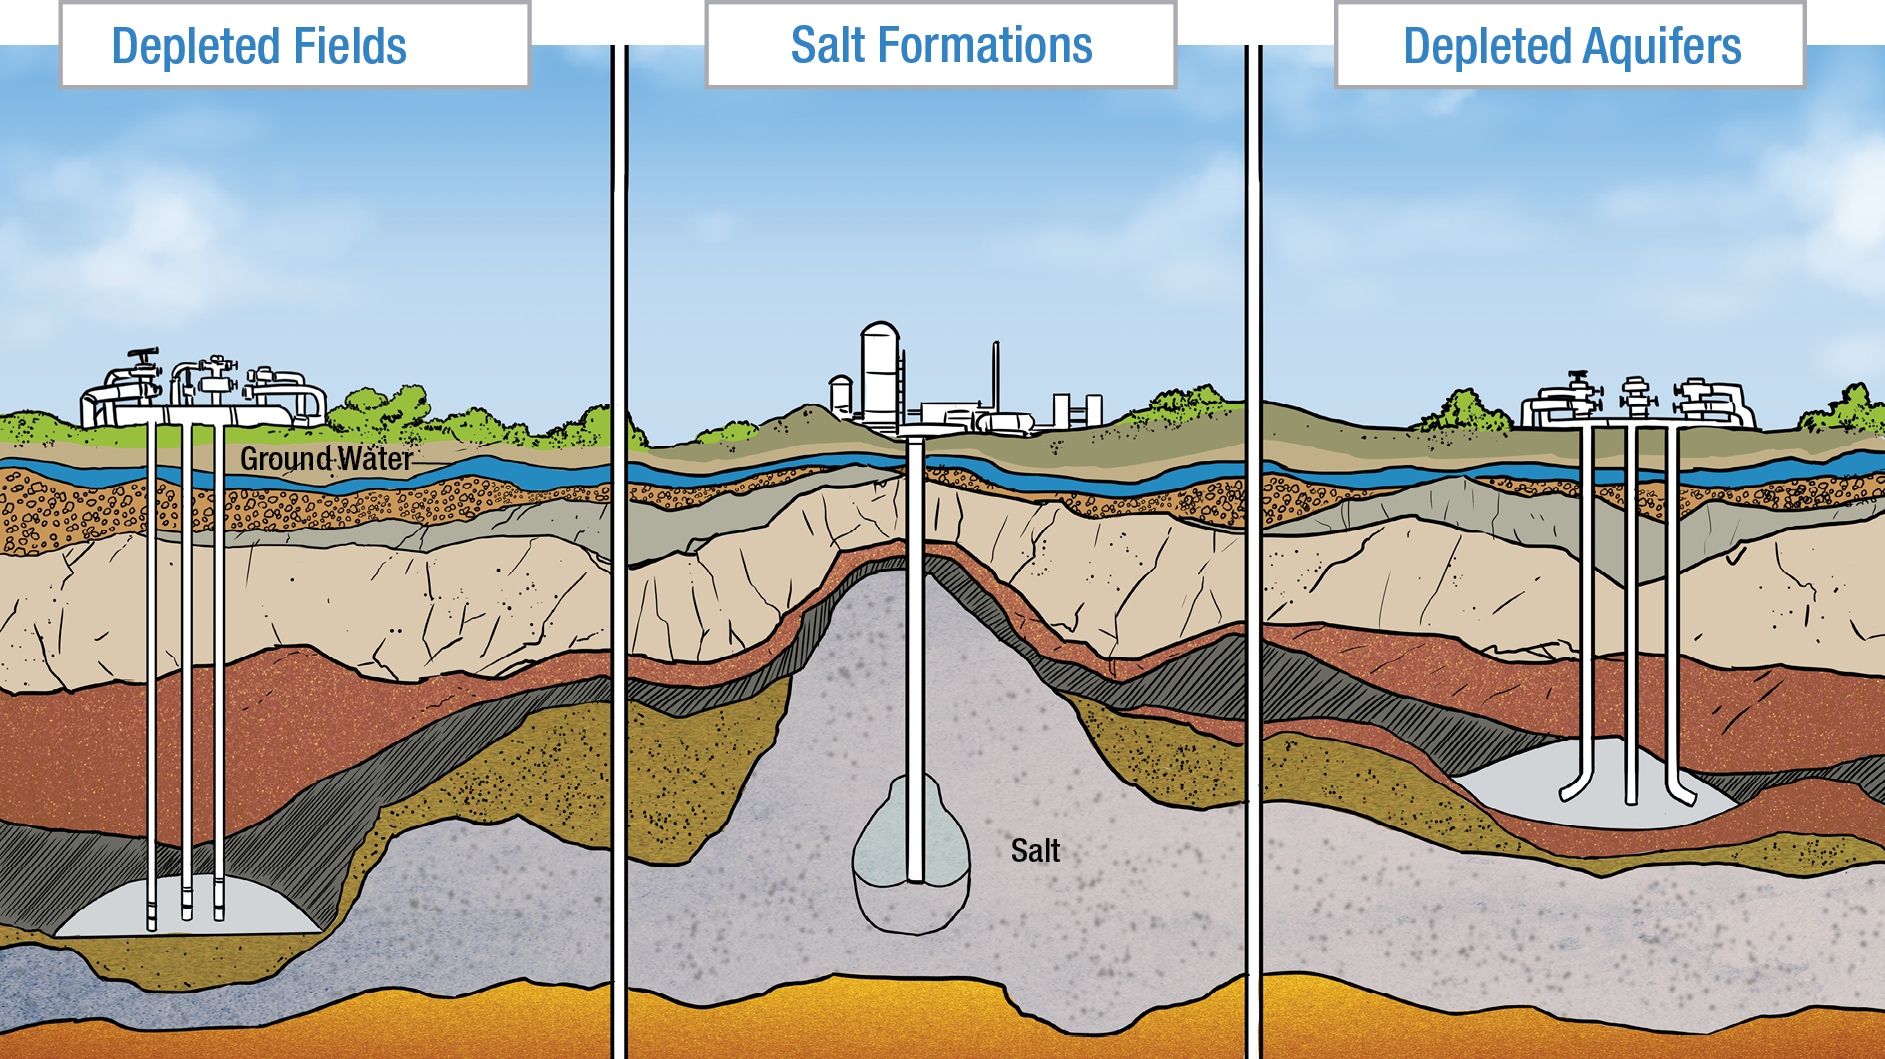 This image shows the different ways to store natural gas - in depleted field, salt formation or depleted aquifers